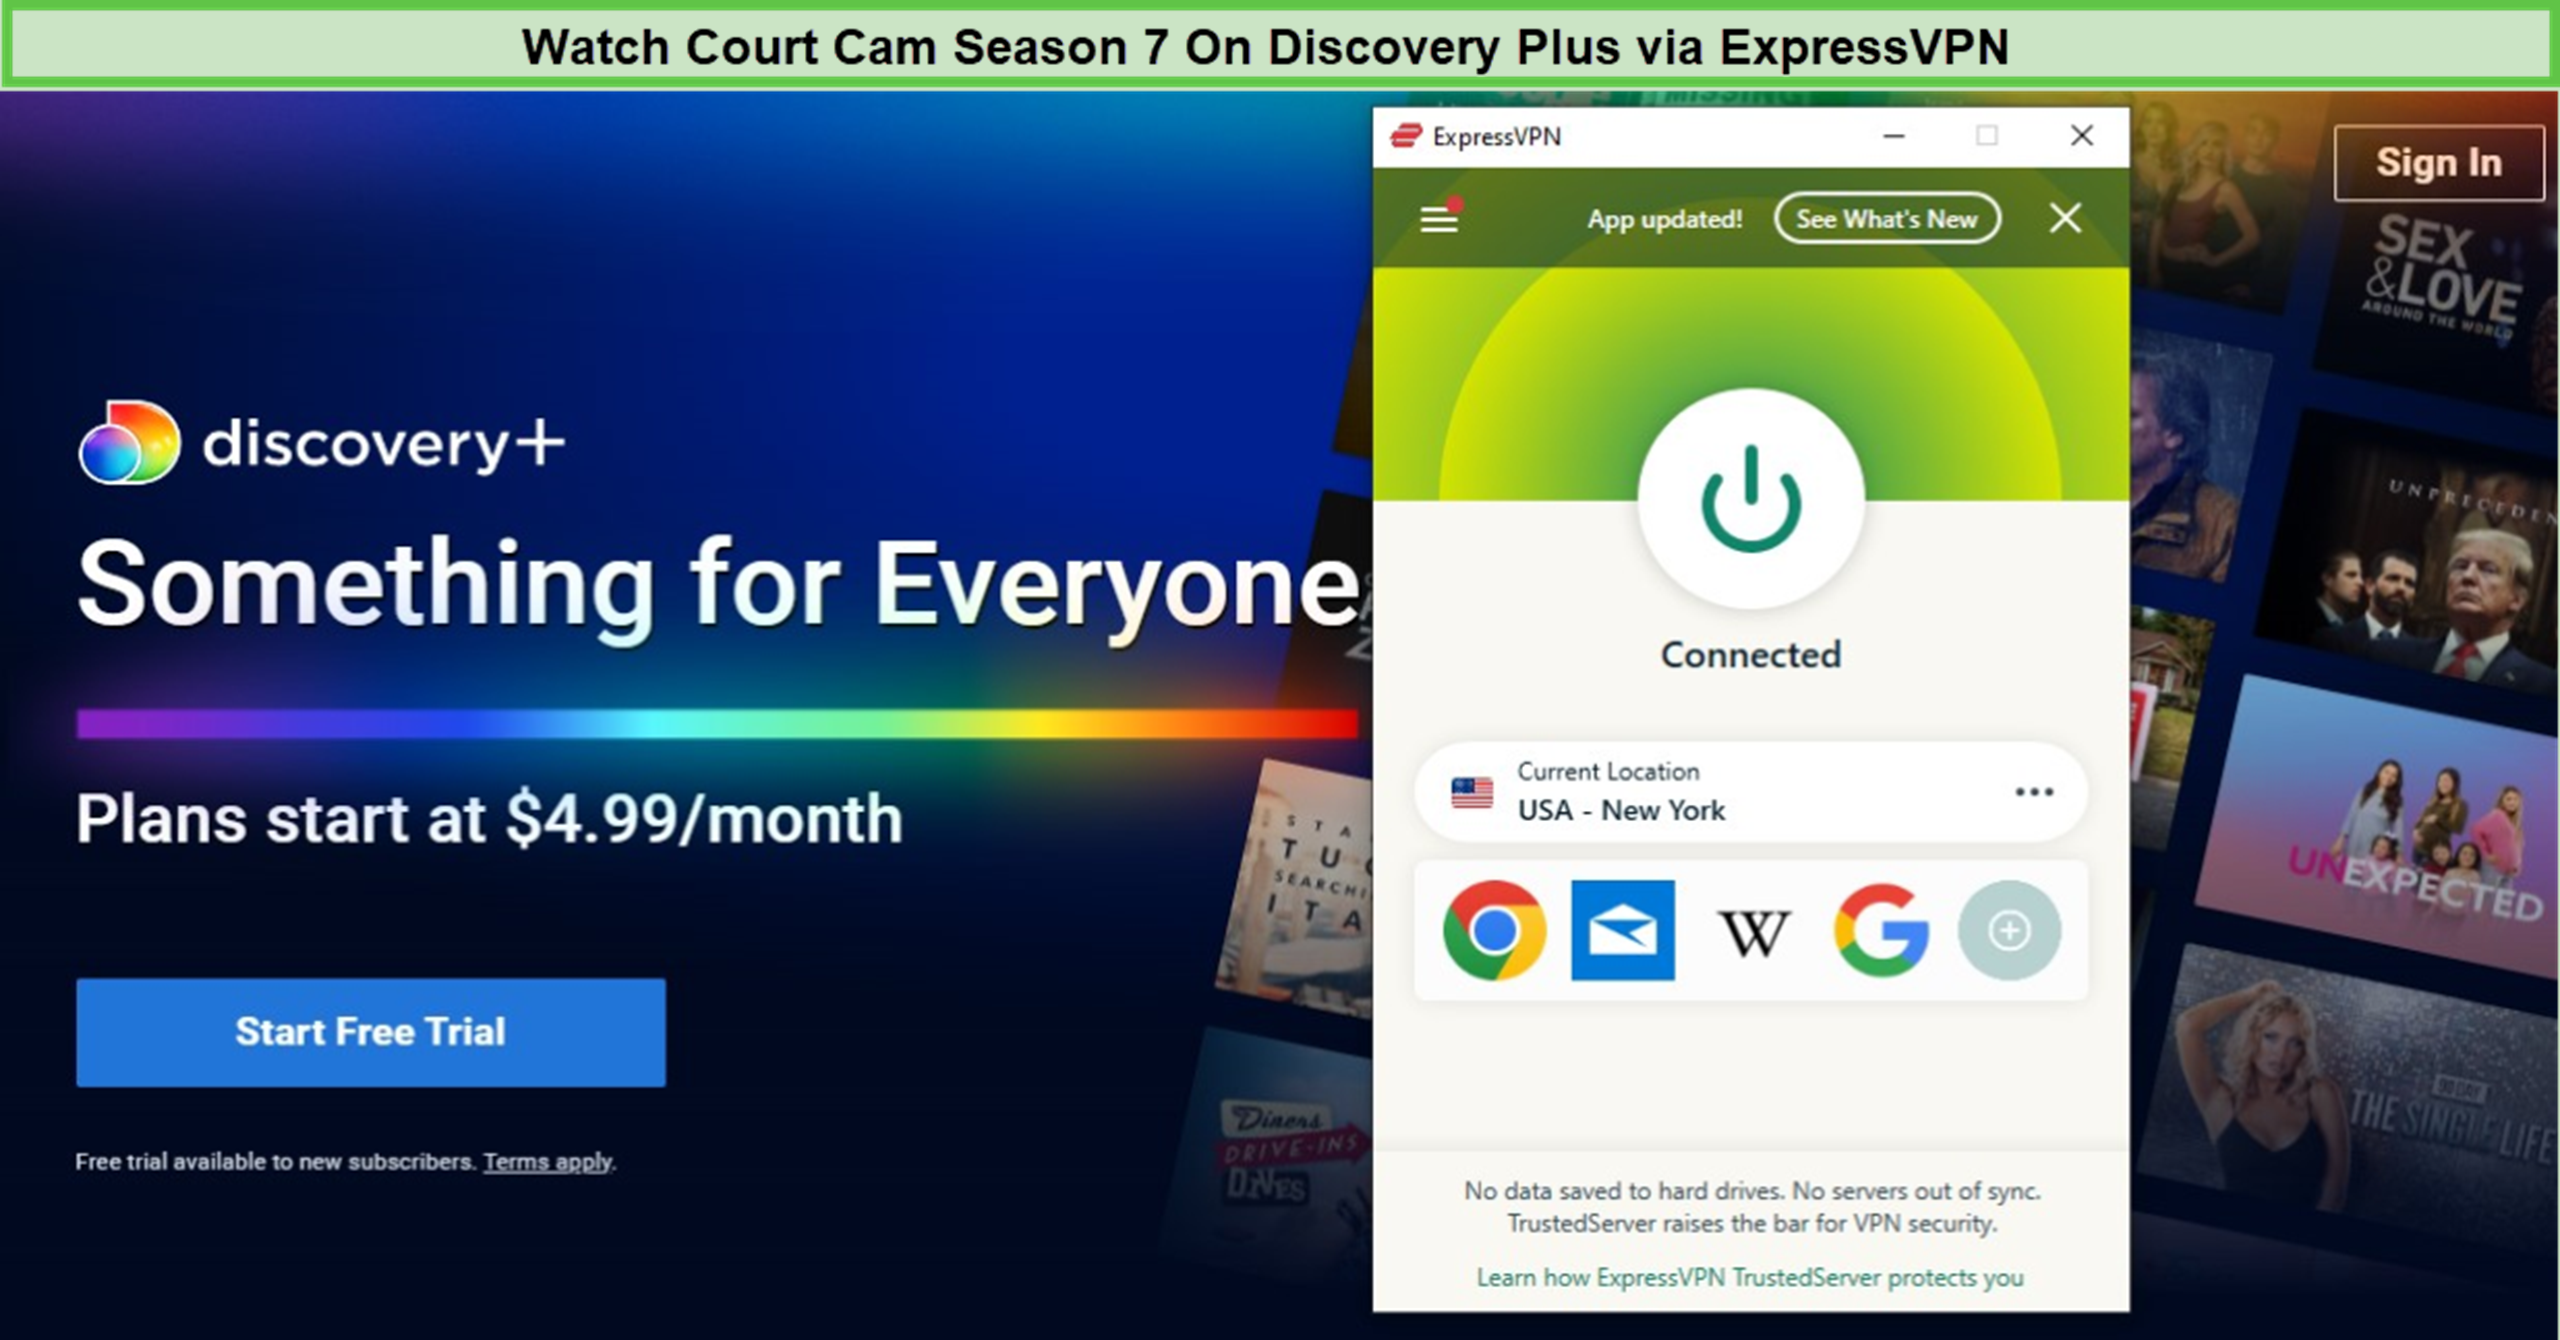 Watch-Court-Cam-Season-7-in-Hong Kong-on-Discovery-Plus-With-ExpressVPN